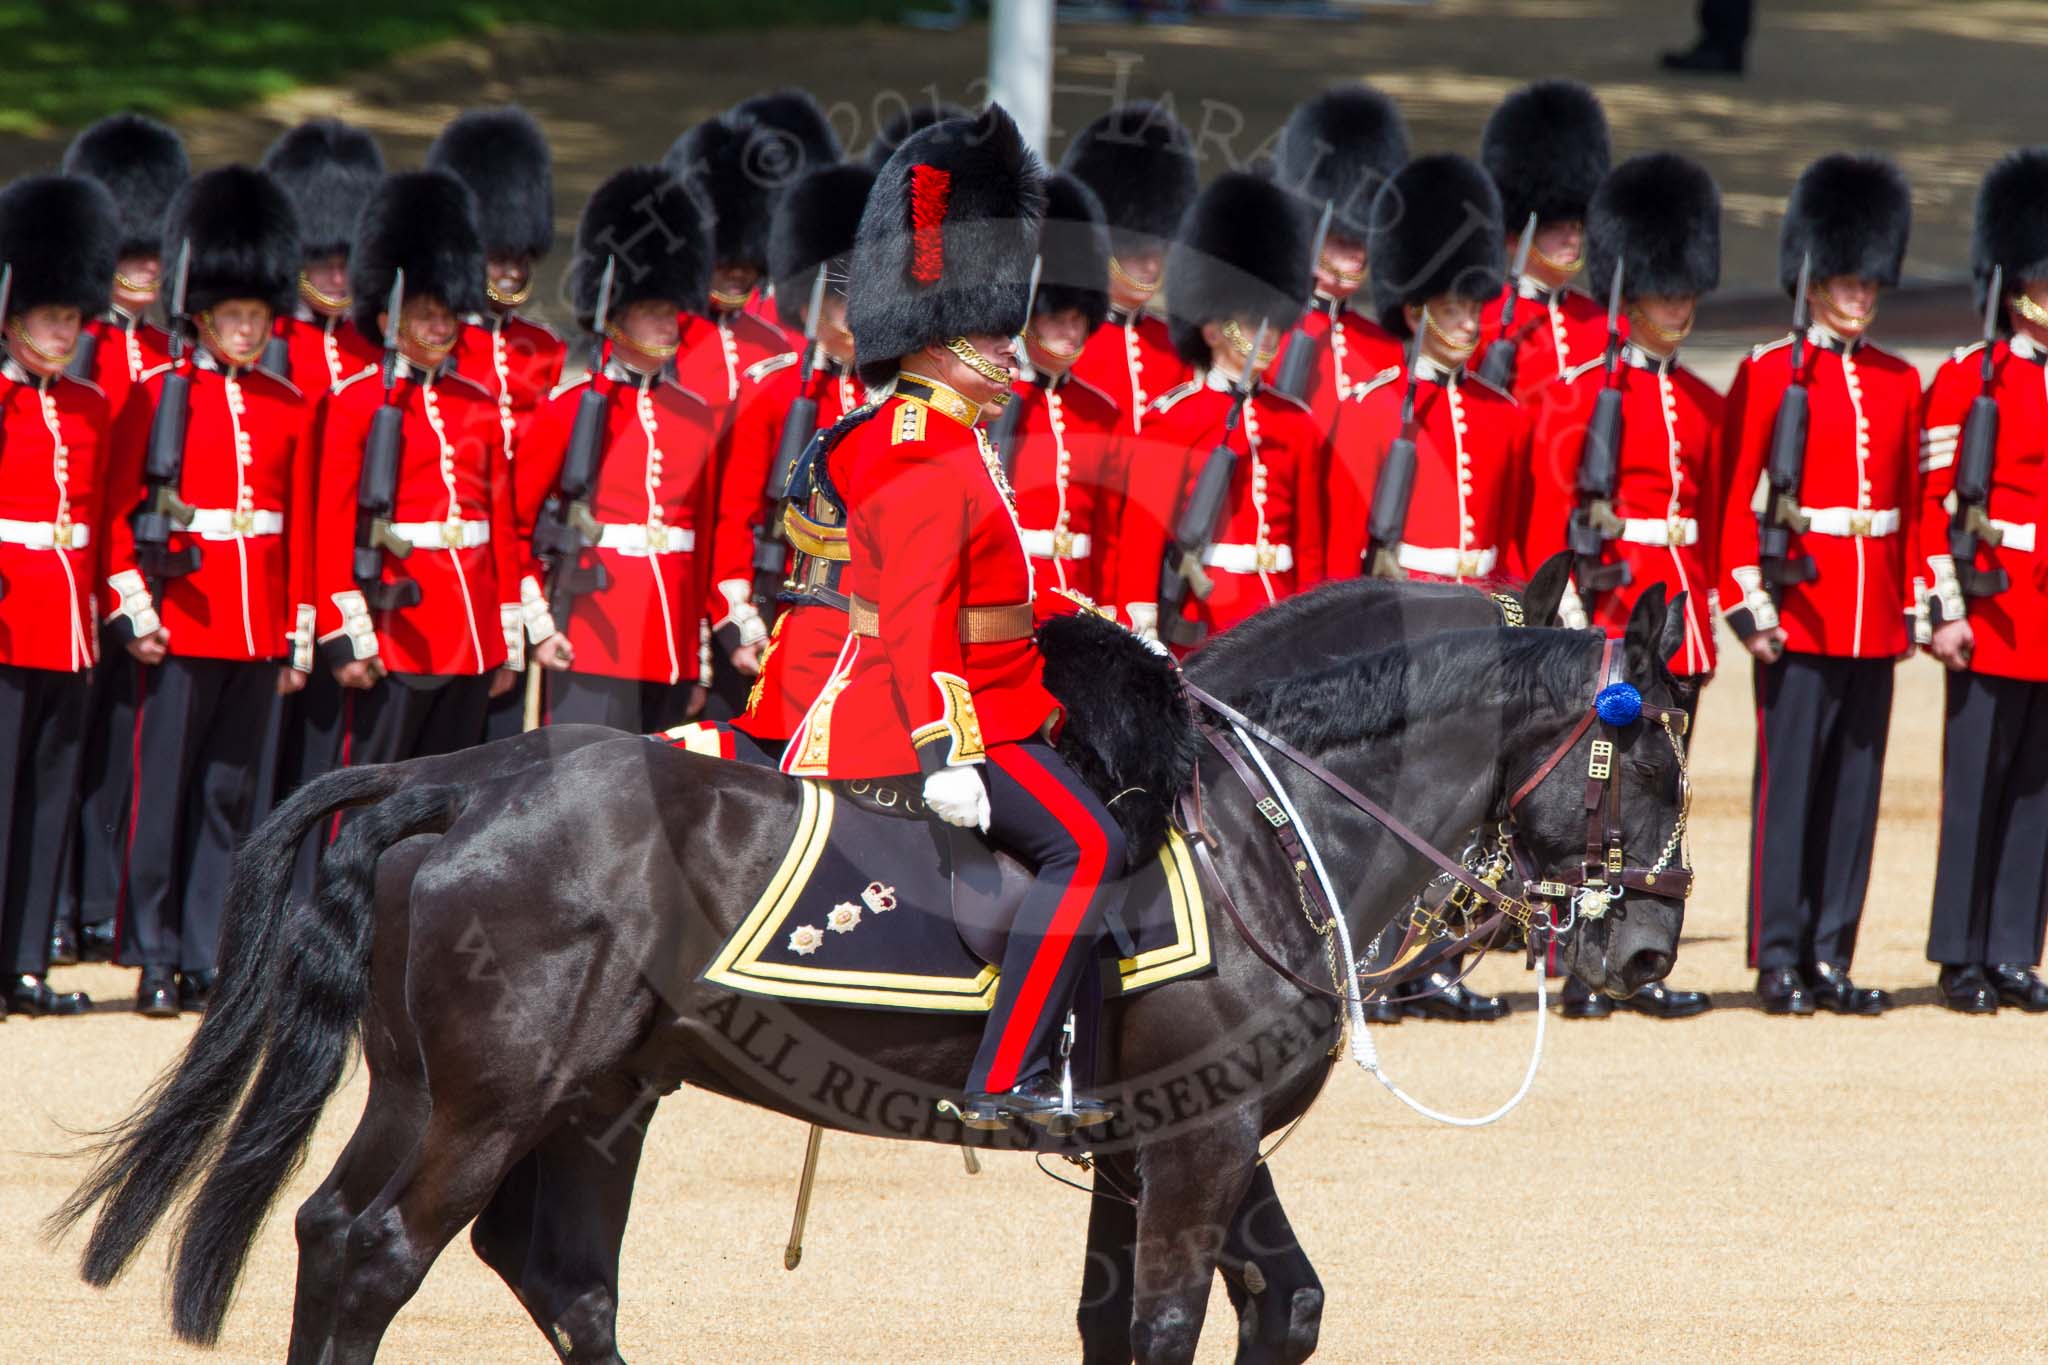 The Colonel's Review 2013: The Non-Royal Colonels, Colonel Coldstream Guards General Sir James Bucknall and Gold Stick in Waiting and Colonel Life Guards, Field Marshal the Lord Guthrie of Craigiebank,  during the Inspection of the Line..
Horse Guards Parade, Westminster,
London SW1,

United Kingdom,
on 08 June 2013 at 11:04, image #366